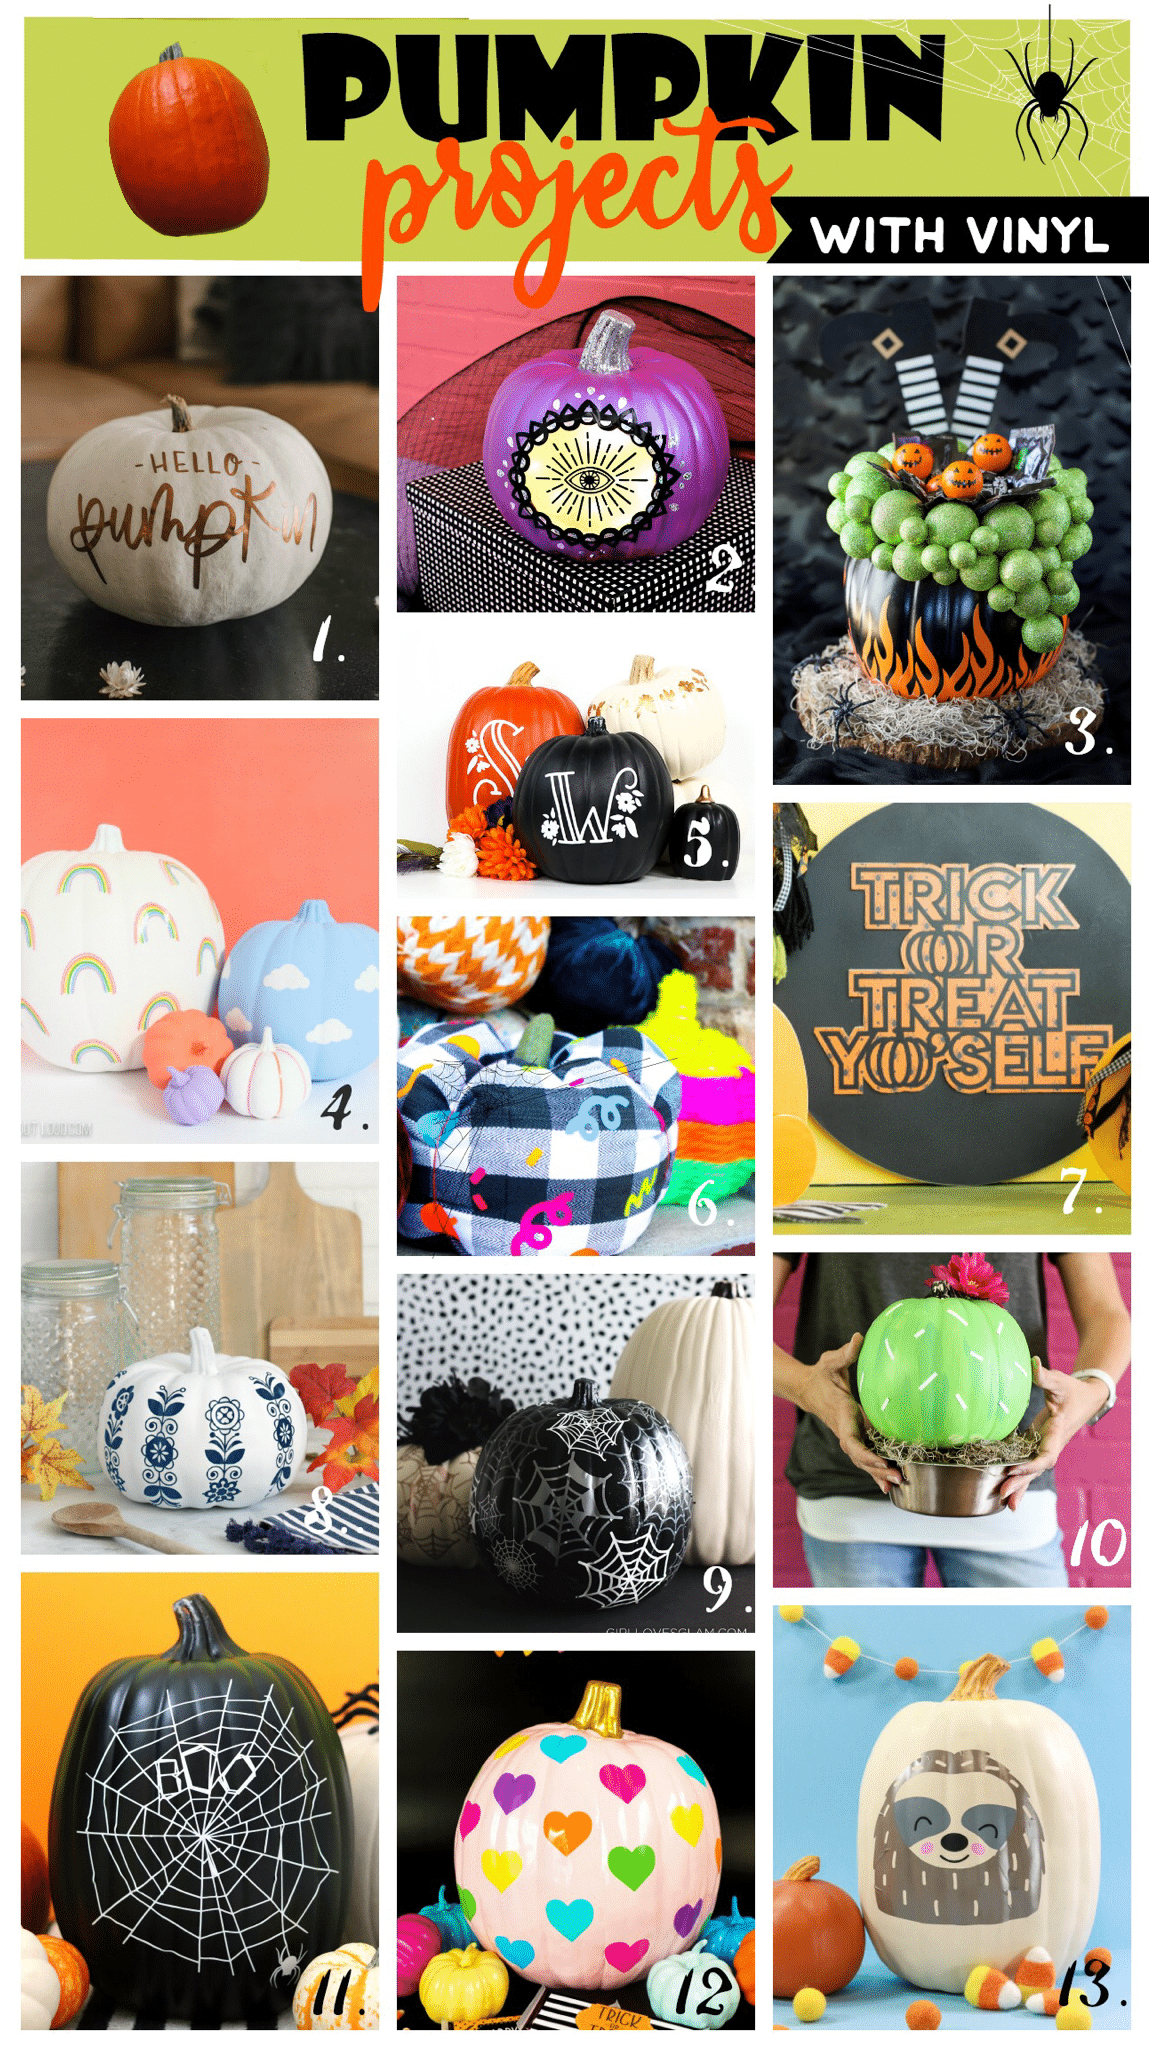 pumpkin projects to do with vinyl